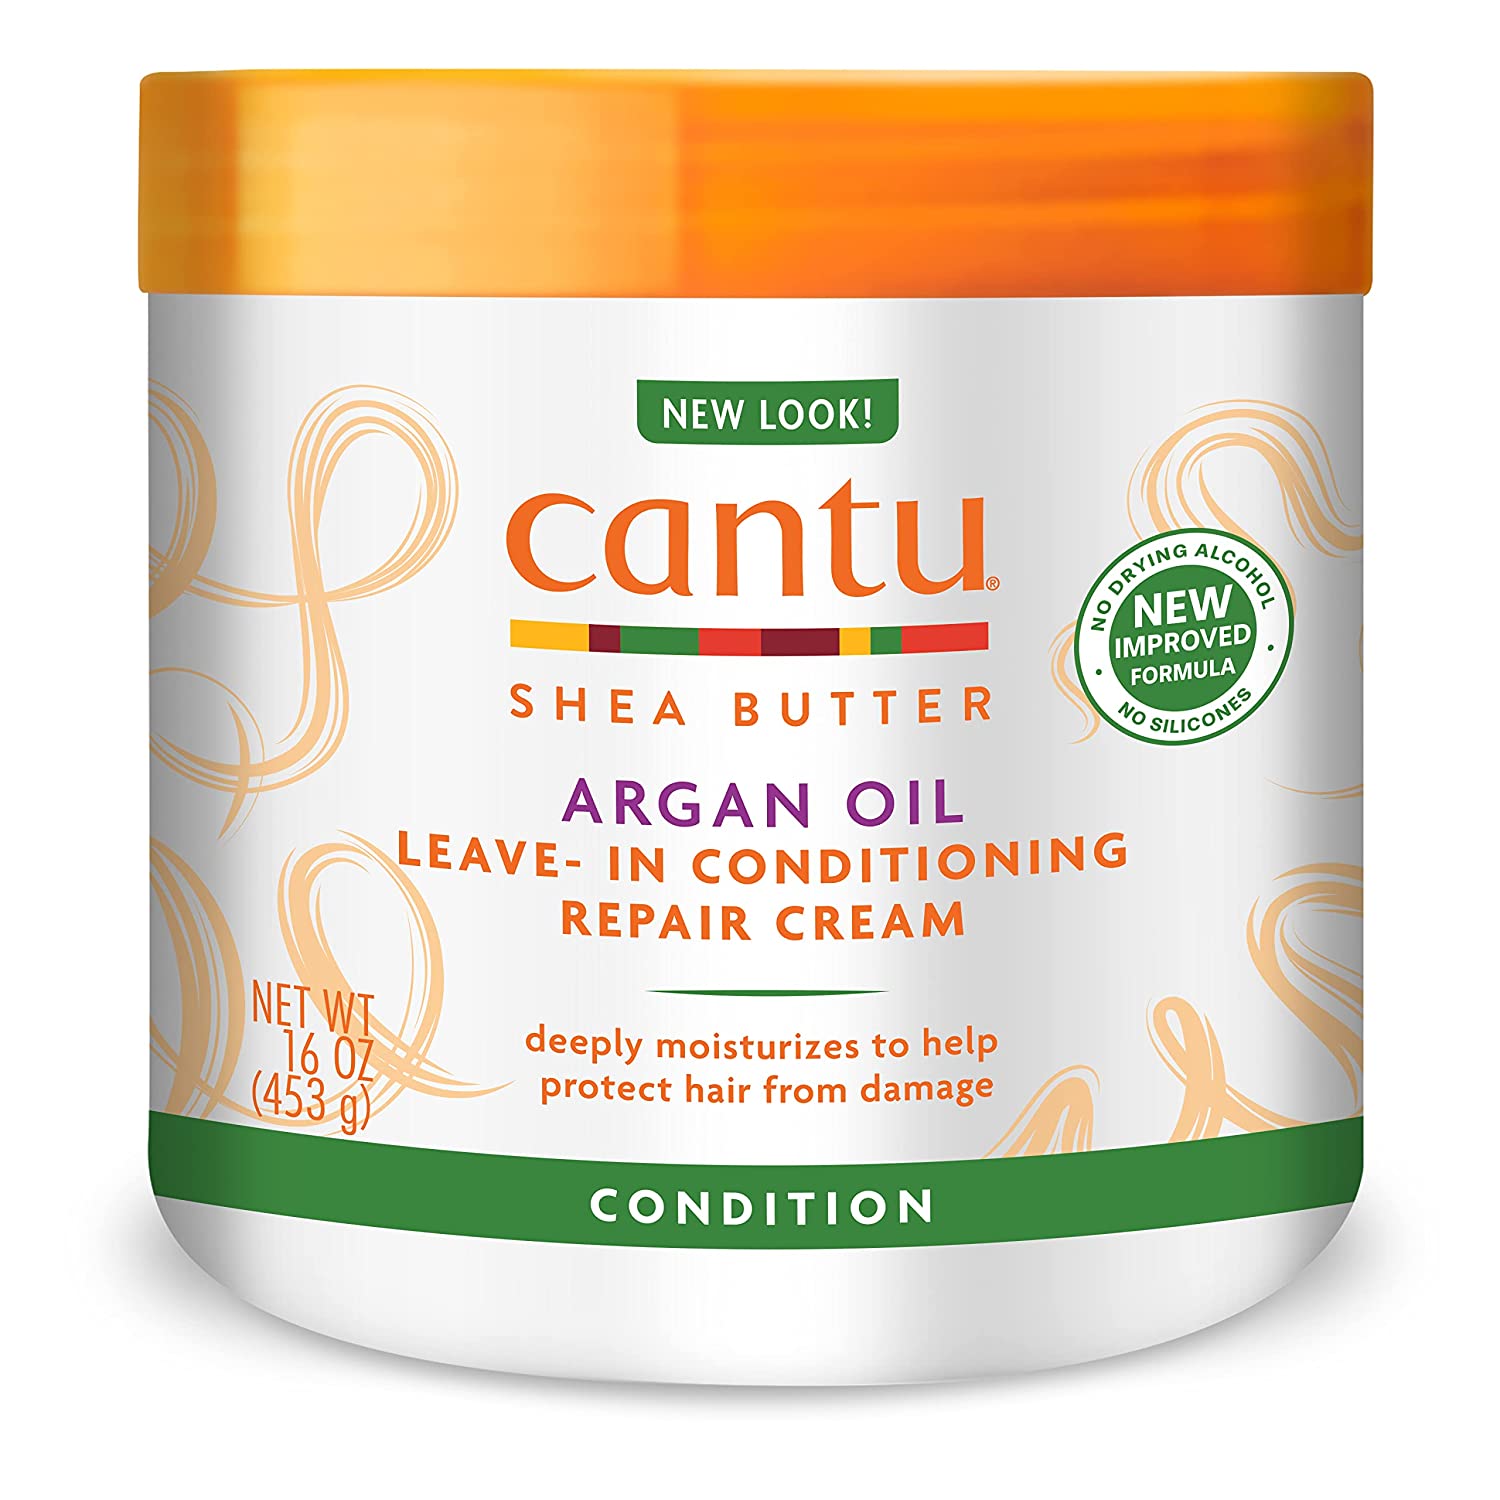 Cantu Argan Oil Leave-In Conditioning Repair Cream Over Styled Hair * * Formulated for VIA-Heated 16 oz (453 g)